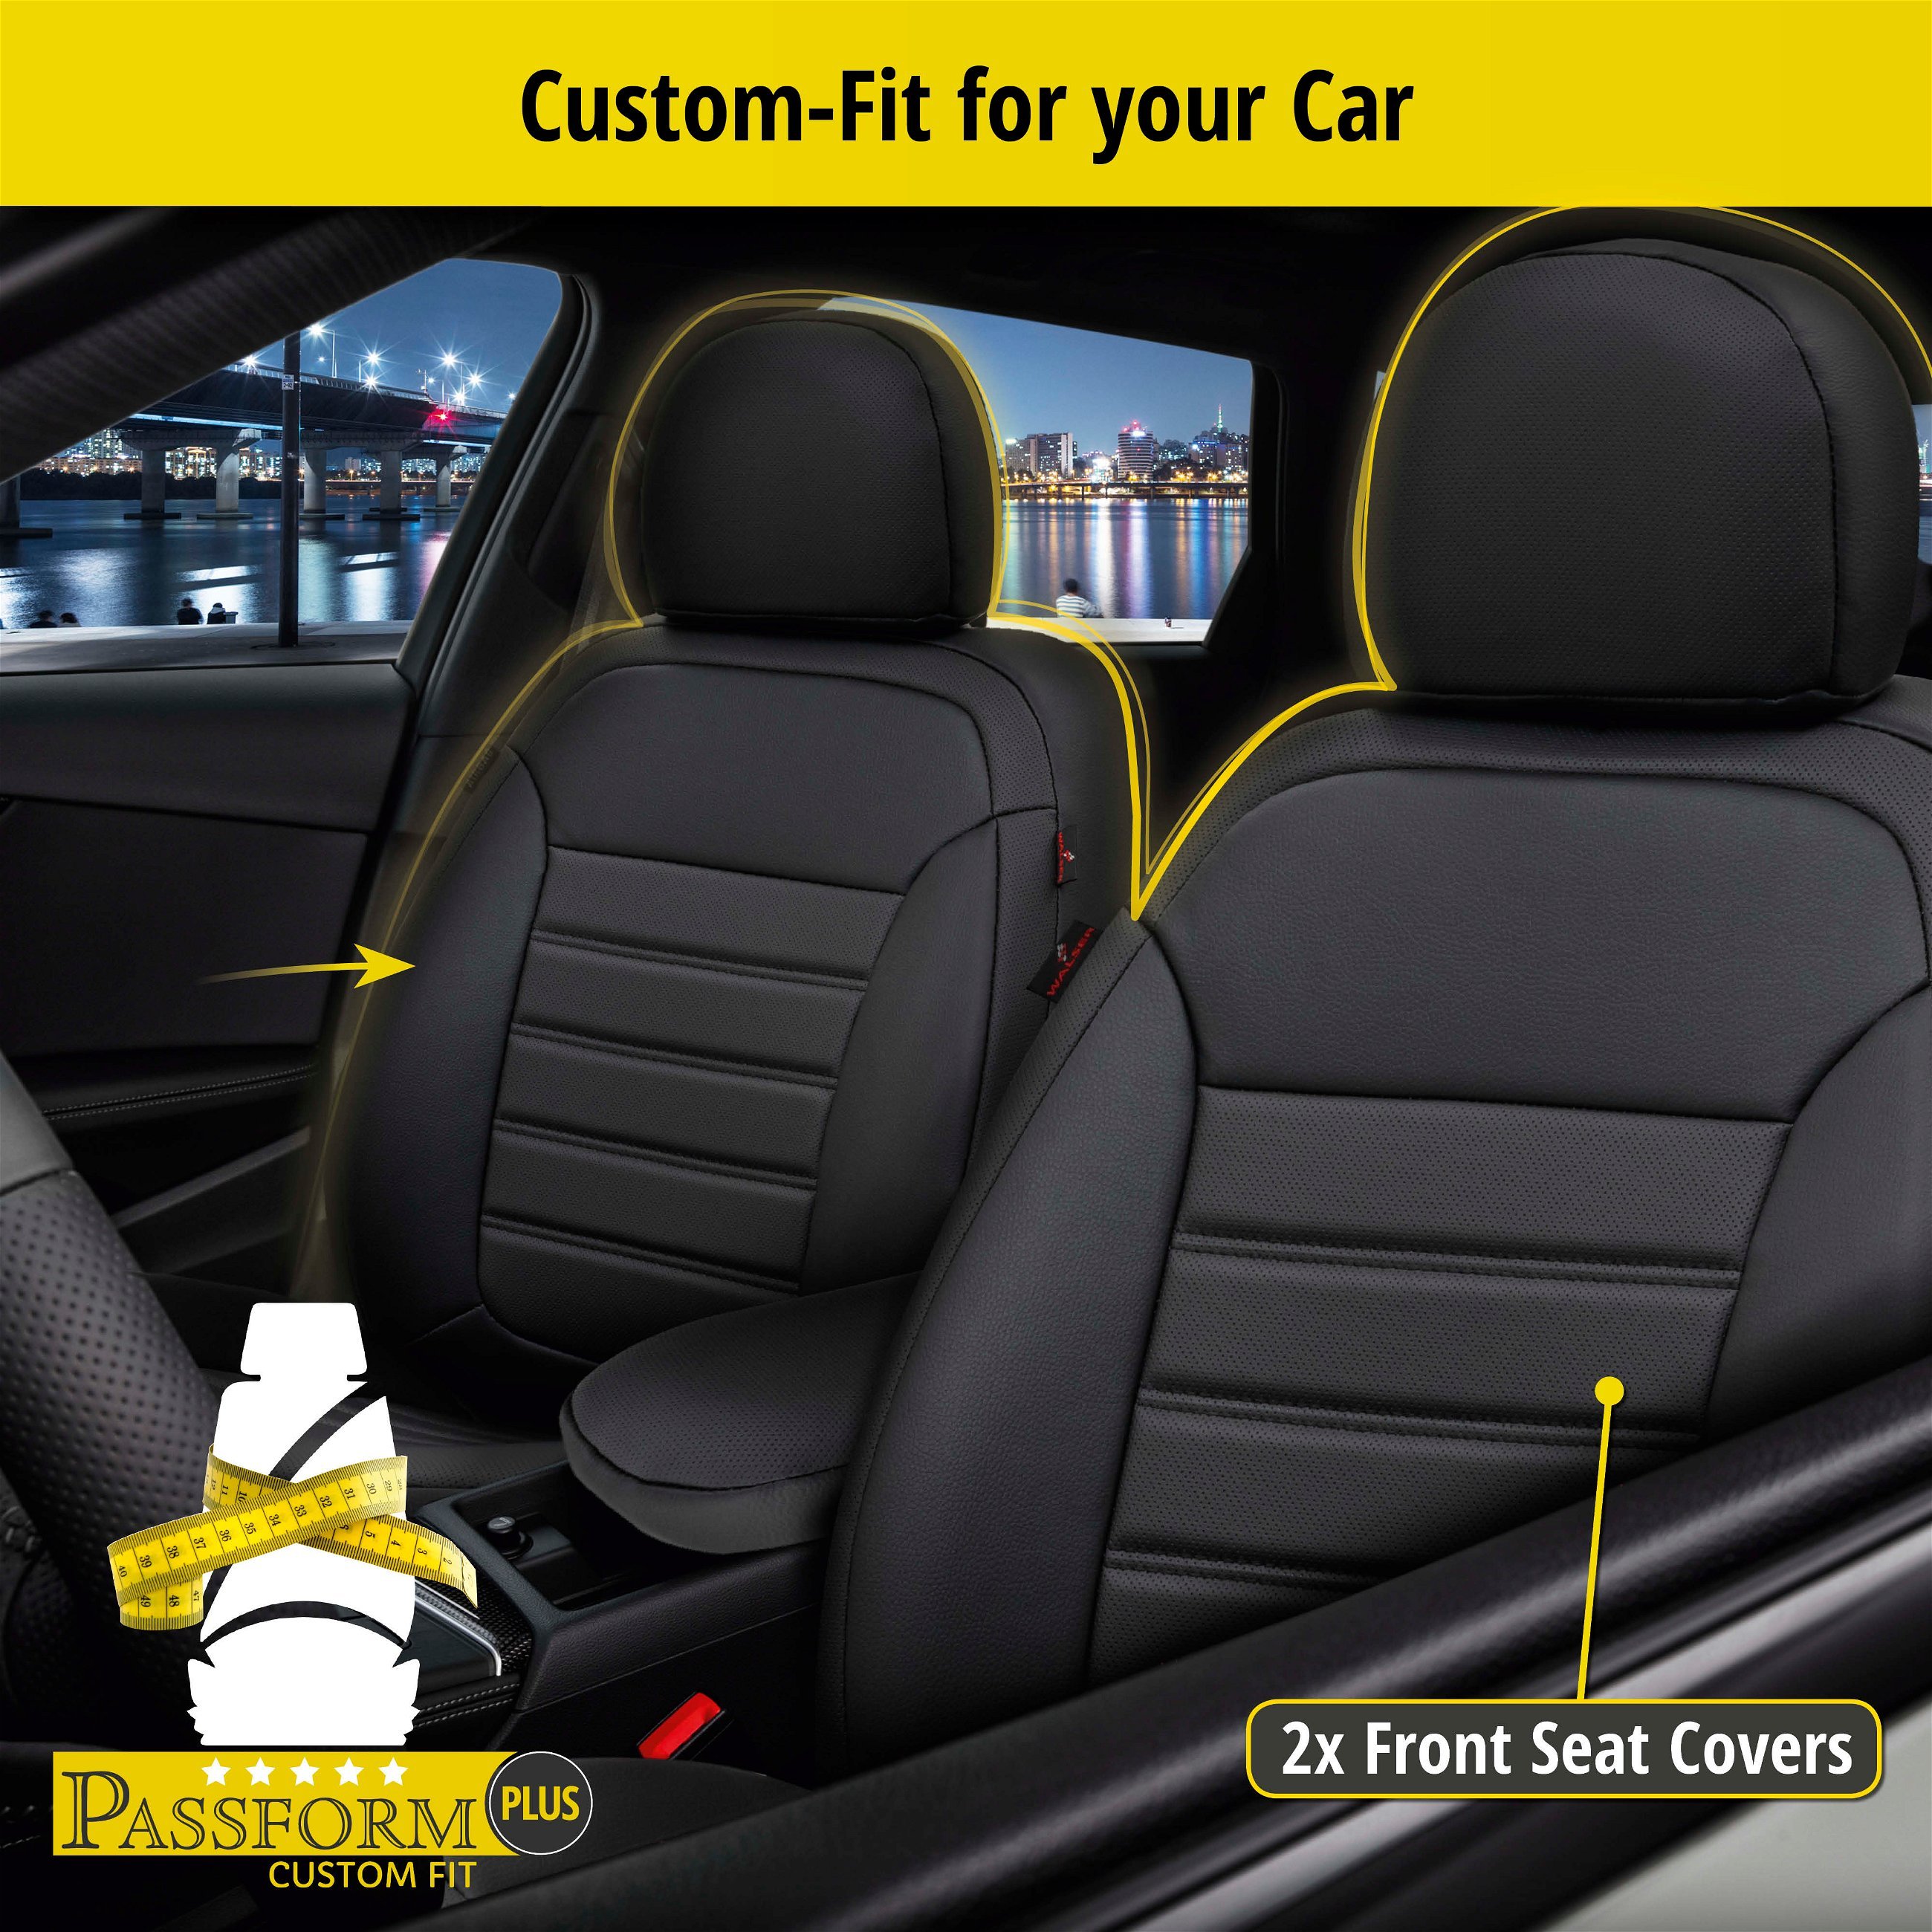 Seat Cover Robusto for Toyota Yaris (P9) 01/2005-12/2014, 2 seat covers for normal seats